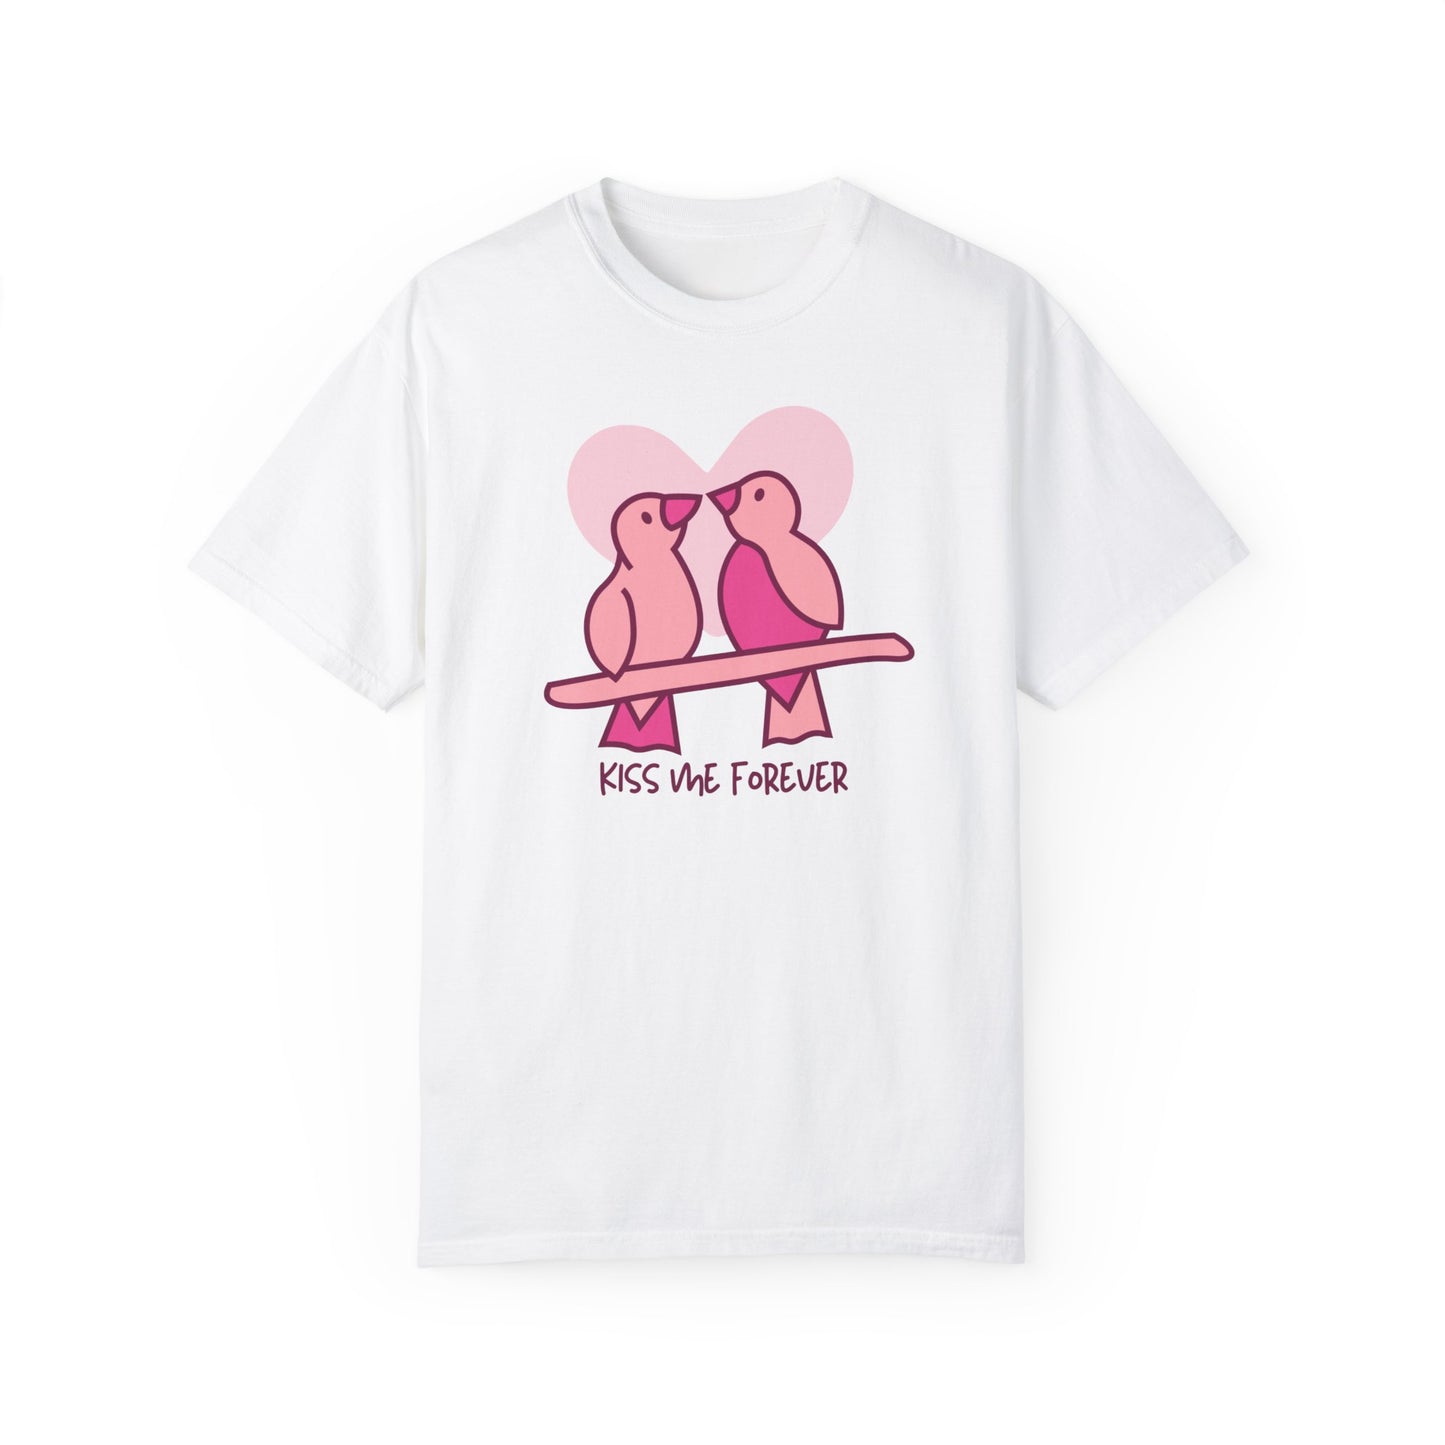 Love Birds Graphic Shirt Kiss Me Forever Valentine's Day Love You Forever Oversize Shirt Hoodie Pink Birds Gift for Her Mom Wife Girlfriend